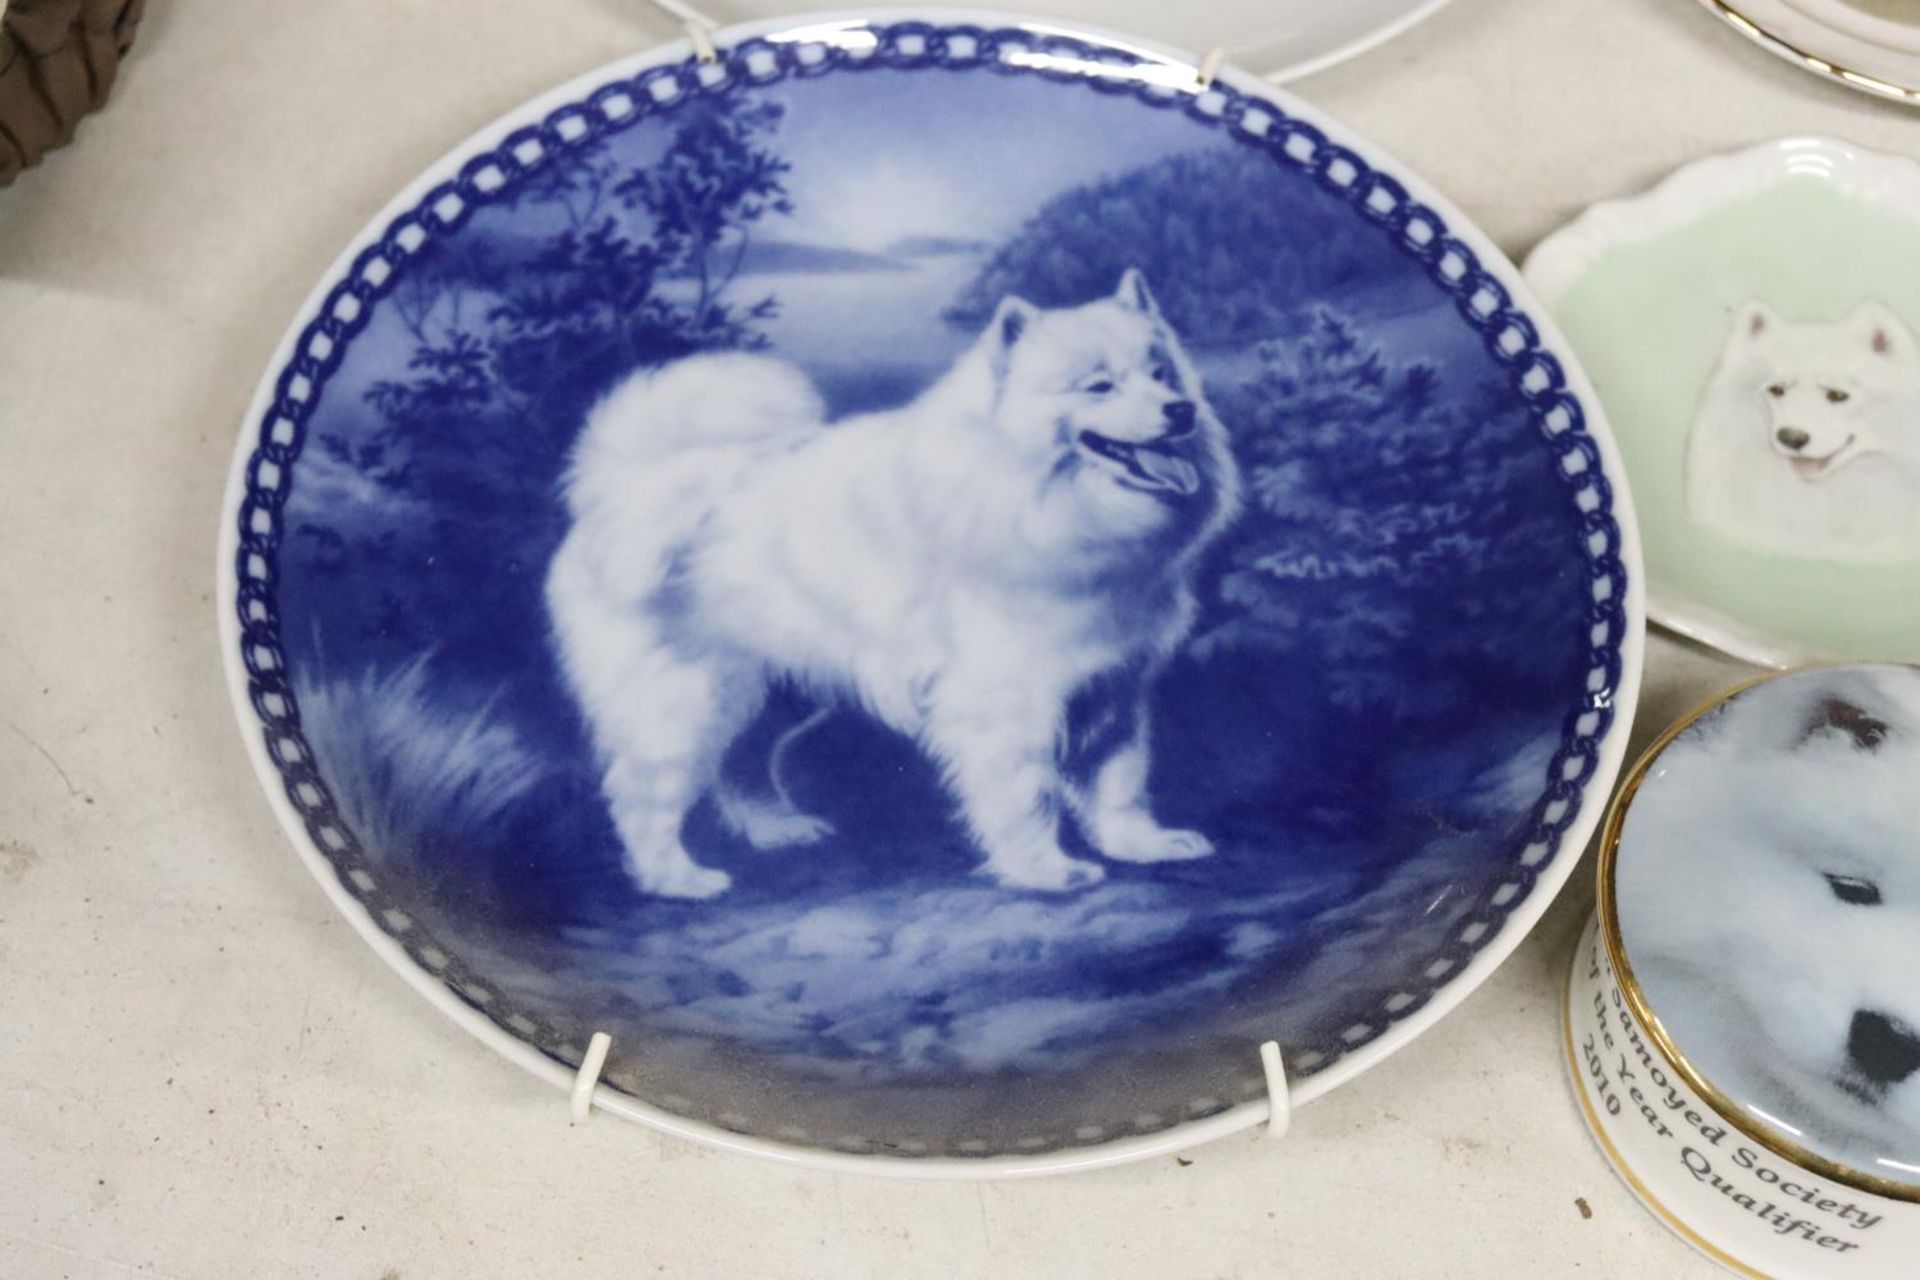 A COLLECTION OF HUSKY DOG RELATED ITEMS TO INCLUDE PLATES, FIGURES, A ROSE BOWL AND TRINKET BOX - Image 2 of 2